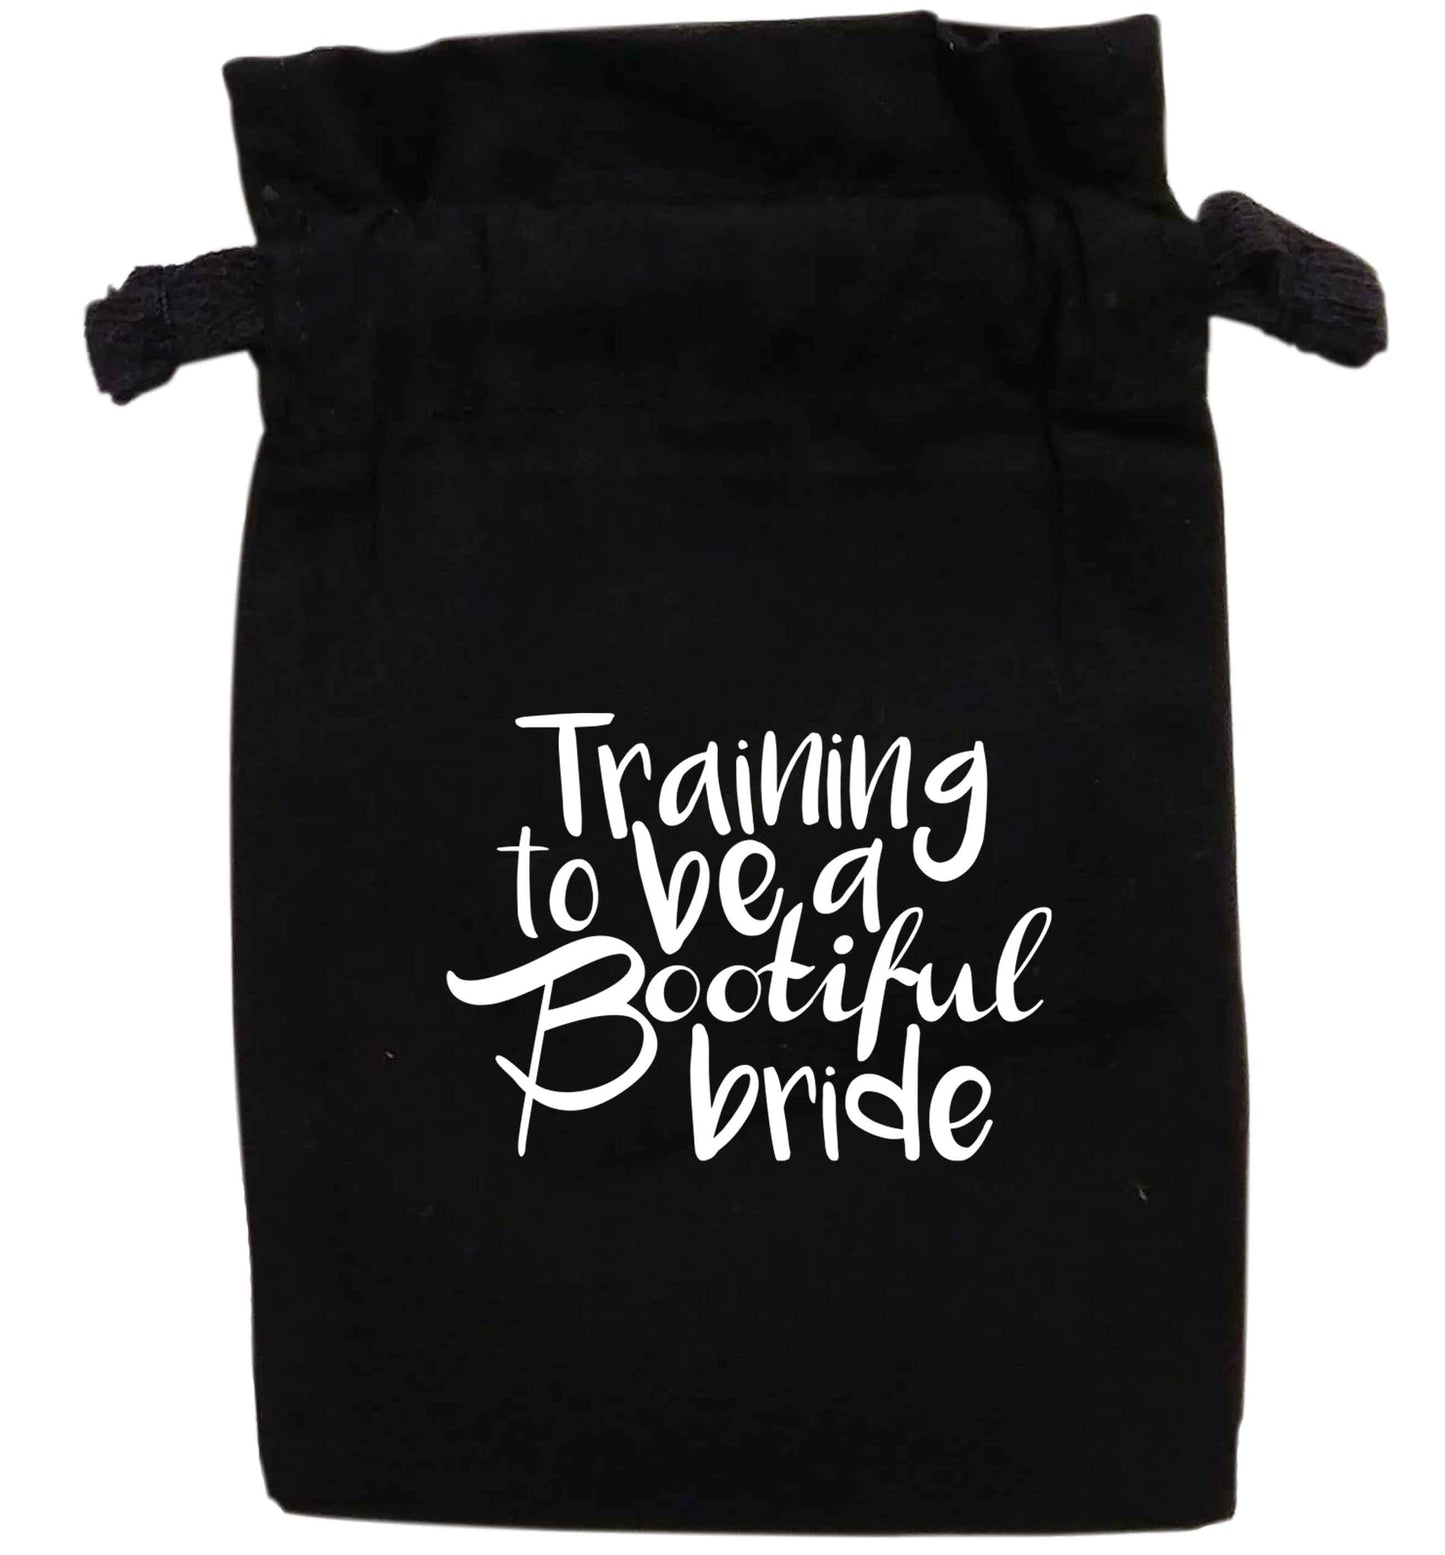 Training to be a bootifull bride | XS - L | Pouch / Drawstring bag / Sack | Organic Cotton | Bulk discounts available!